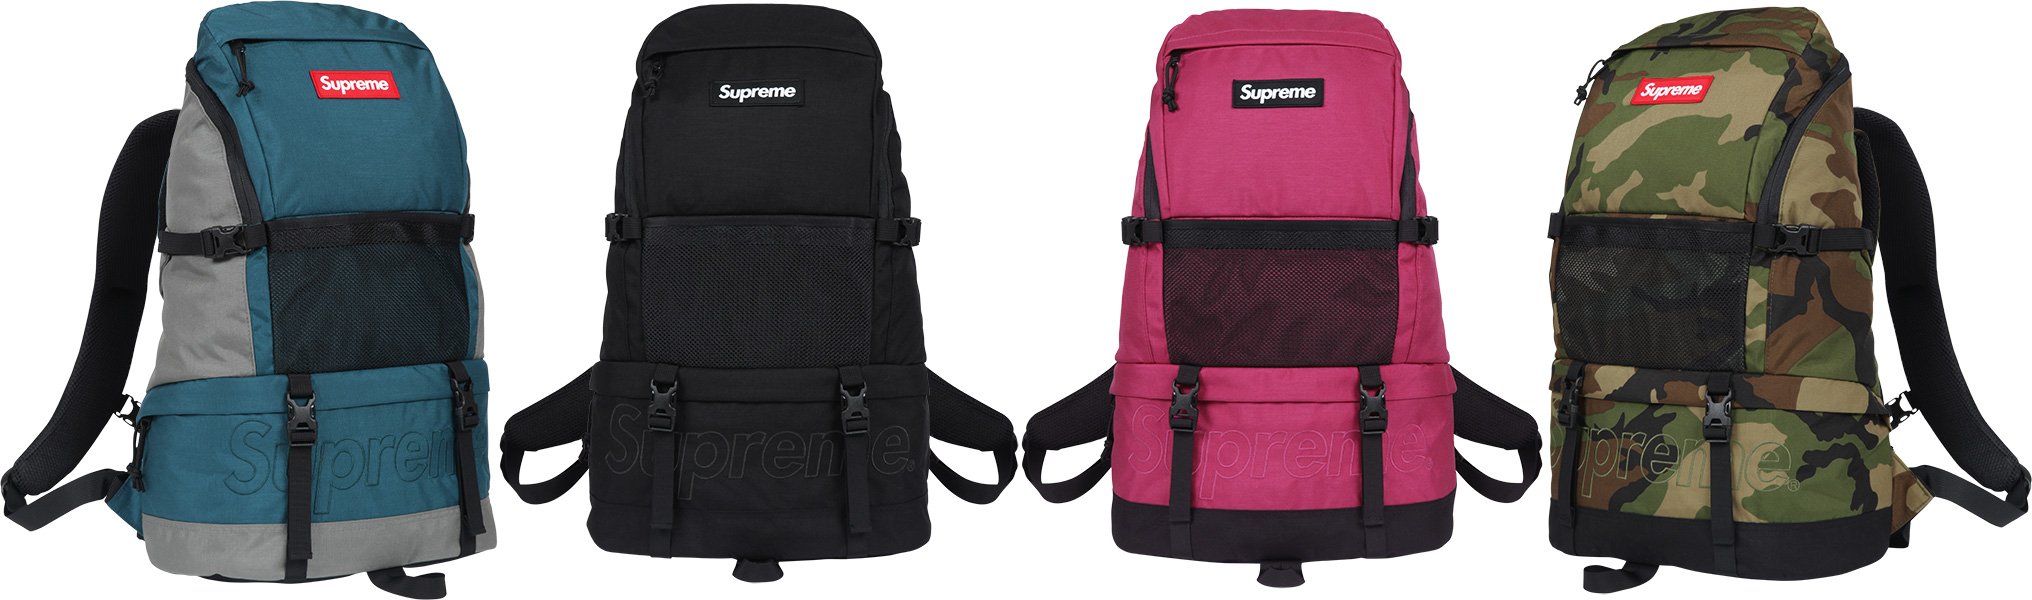 Contour Backpack - fall winter 2015 - Supreme